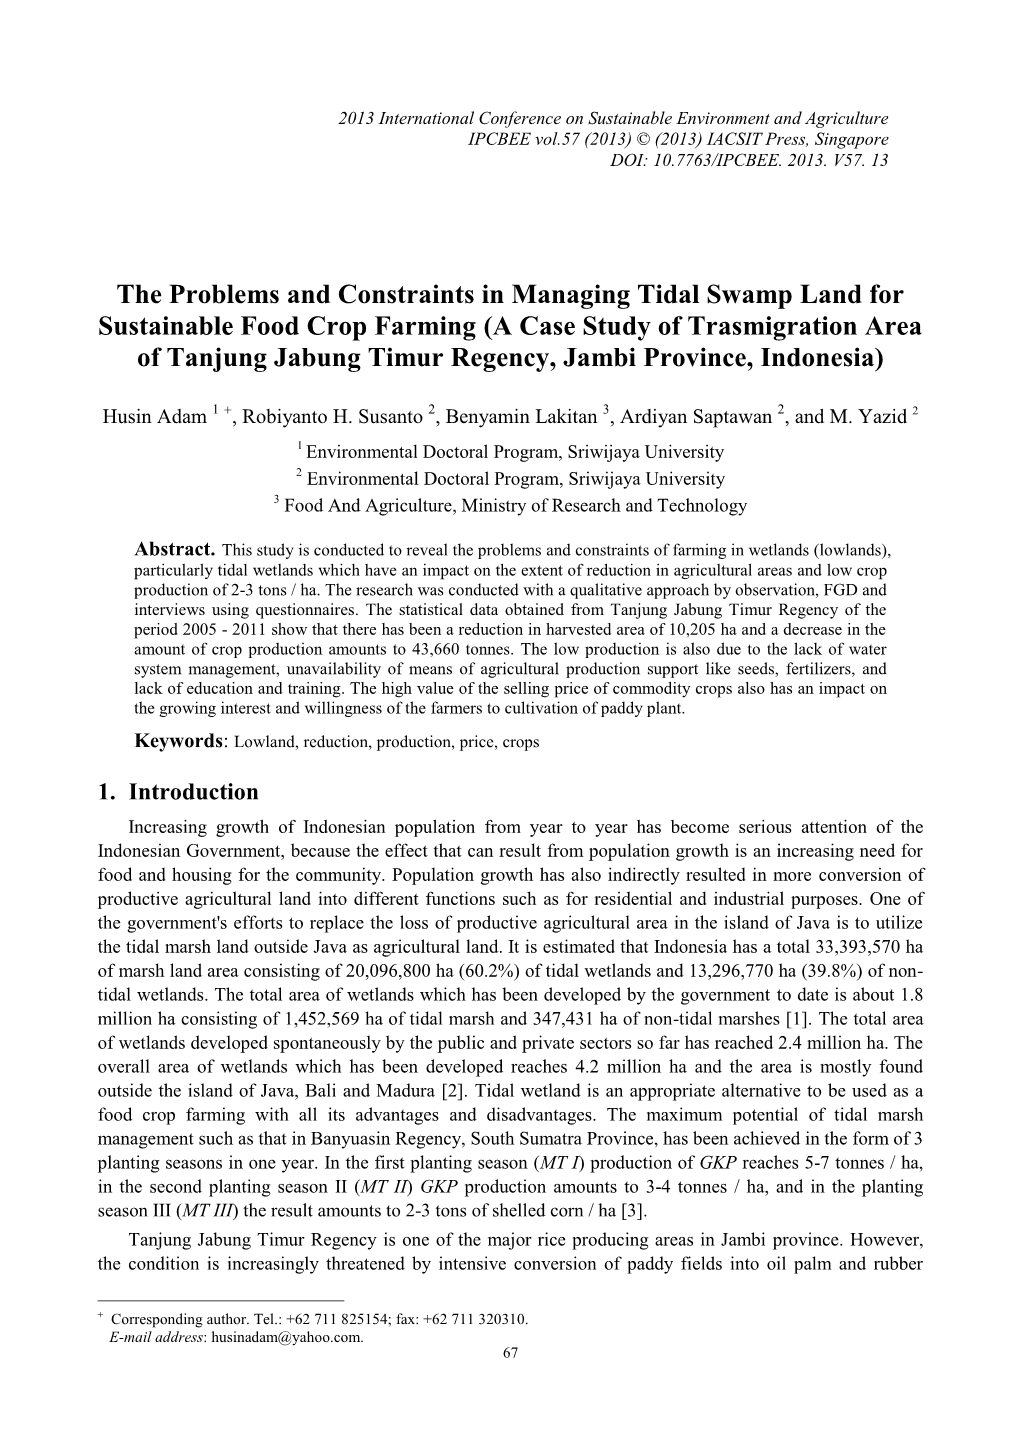 The Problems and Constraints in Managing Tidal Swamp